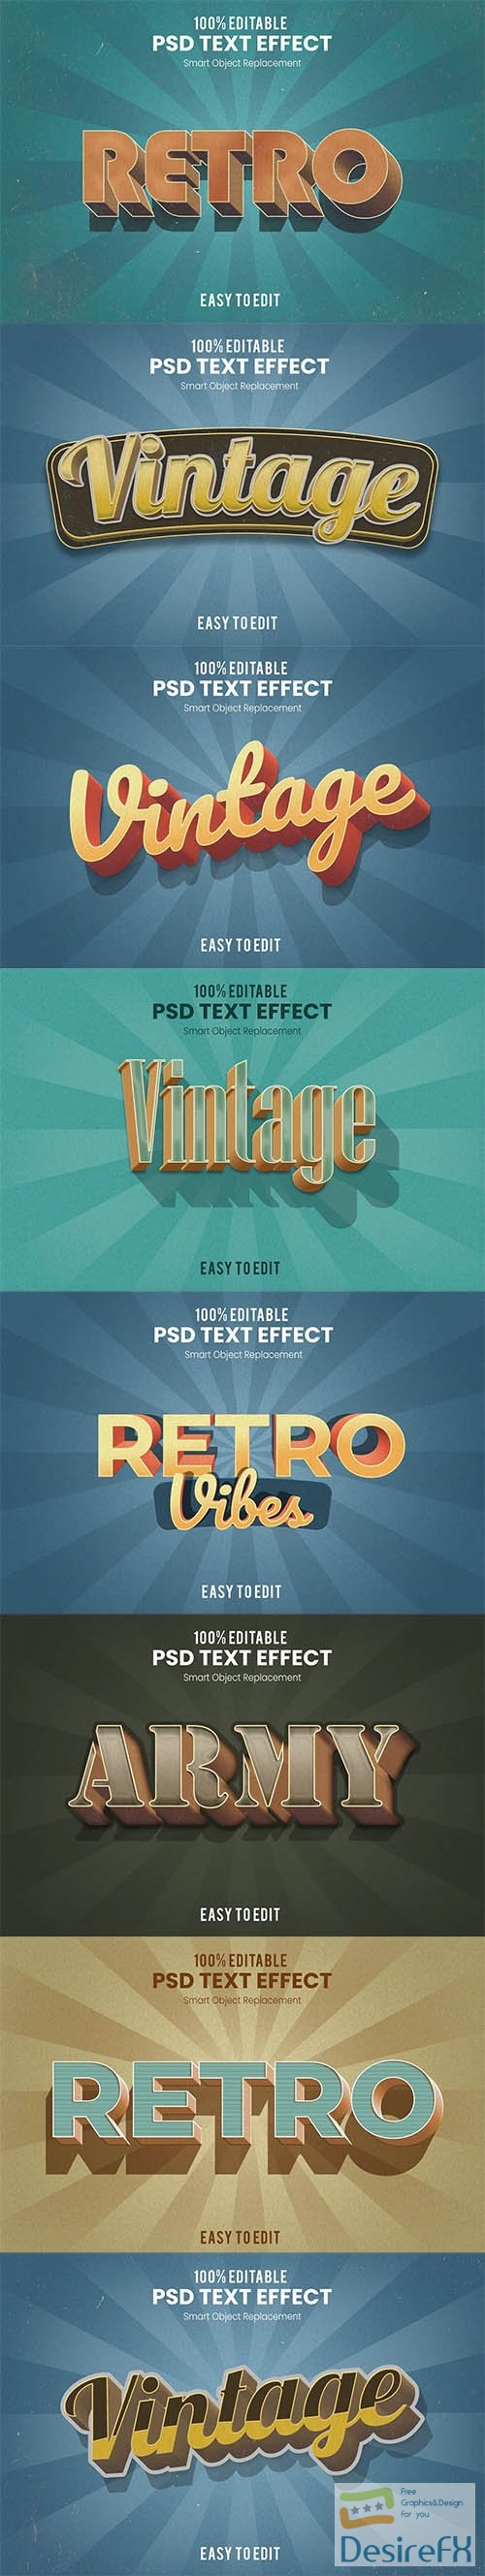 Retro 3D Text Effects Pack